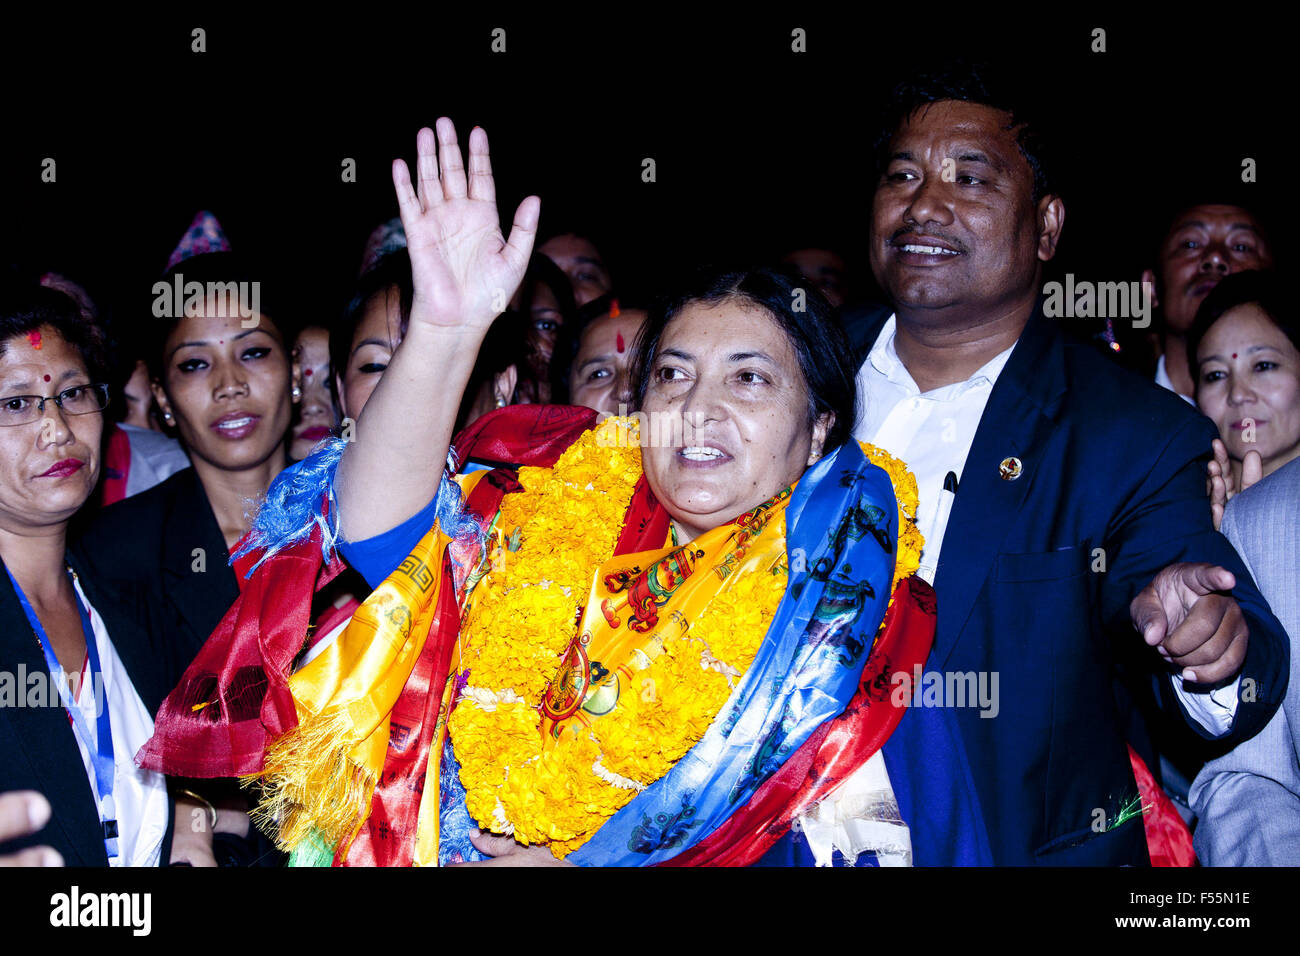 (151028) -- KATHMANDU, Oct. 28, 2015 (Xinhua) -- Bidhya Devi Bhandari (C), Vice Chairperson of the Communist Party of Nepal (Unified Marxist-Leninist), gestures after winning the election at the Legislature-Parliament house in Kathmandu, Nepal, Oct. 28, 2015. Nepal's CPN (UML)'s Vice President Bidhya Devi Bhandari has been elected as the first female president of Nepal on Wednesday, the first time in the history of the patriarchy-backed Himalayan nation to grace the title of head of state to any woman. (Xinhua/Pratap Thapa) Stock Photo